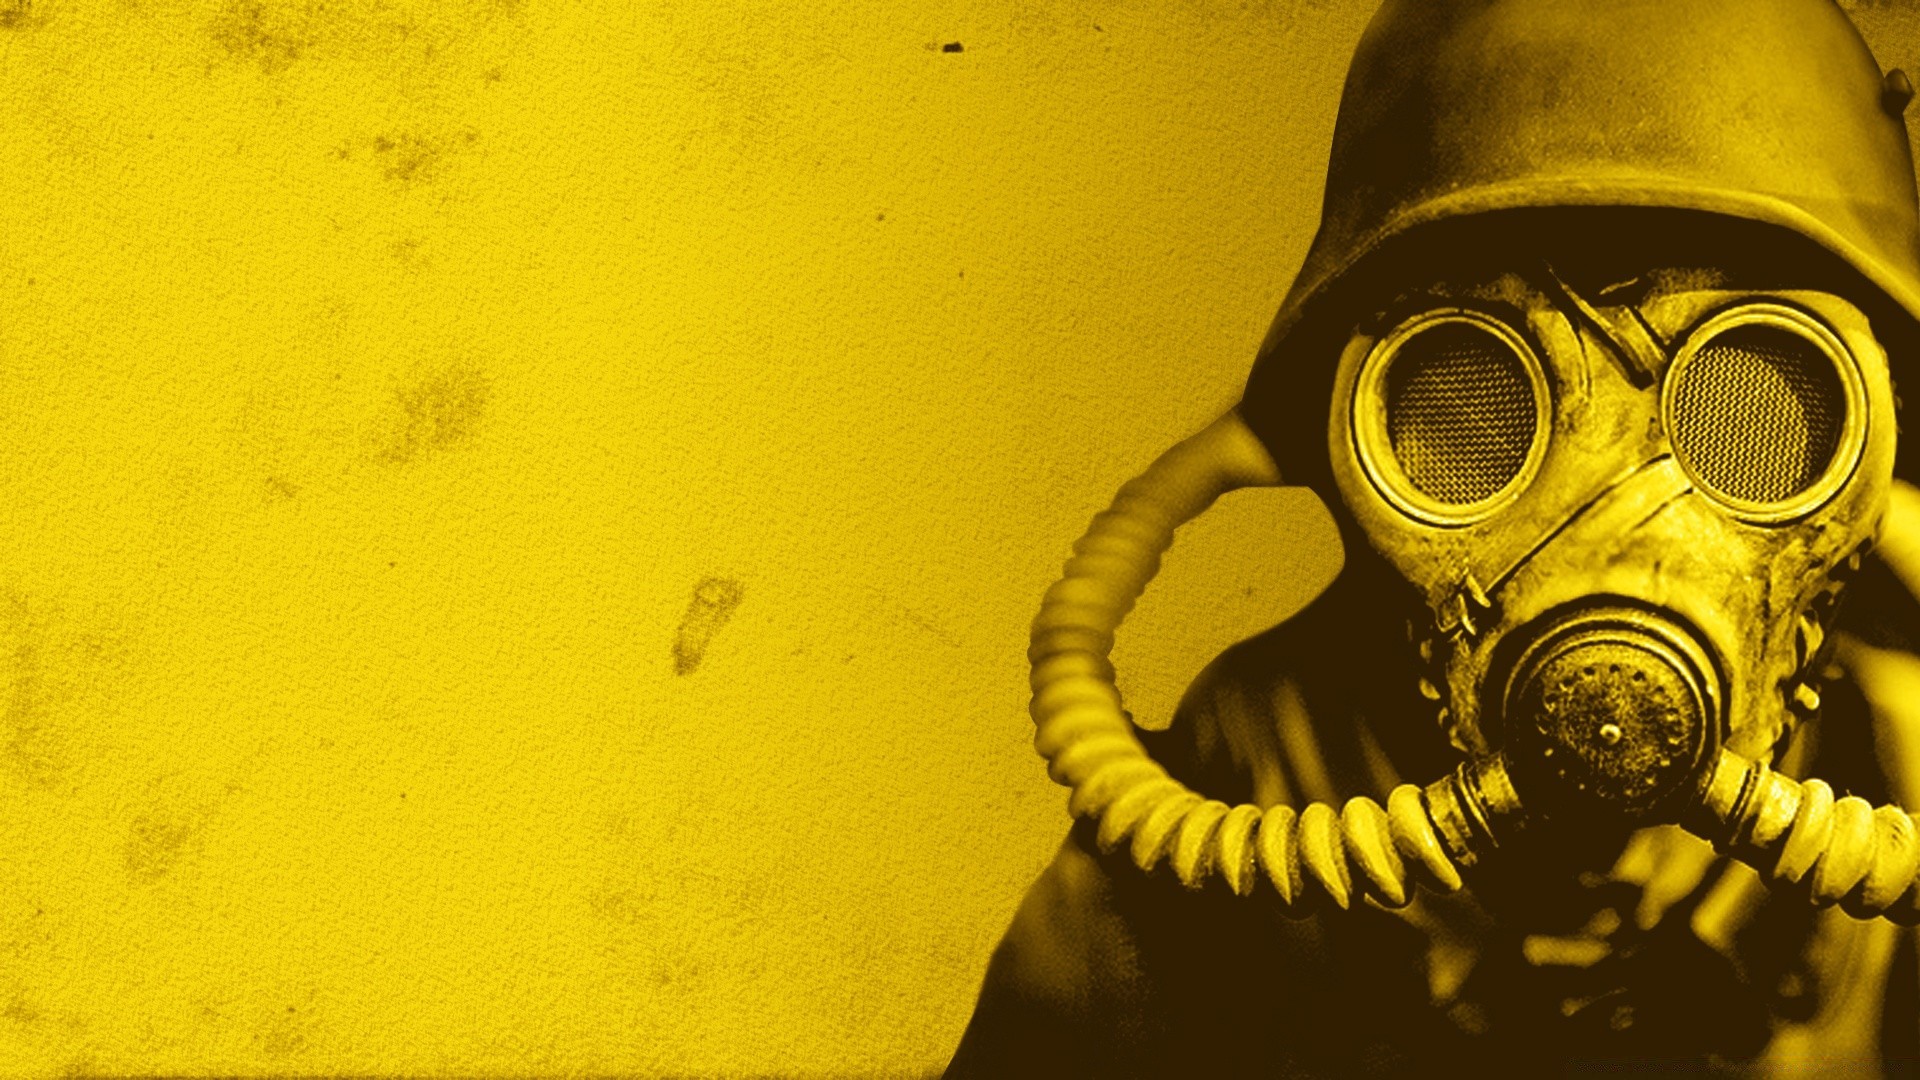 infantry toxic desktop pollution vintage dirty abstract radioactive old retro art texture